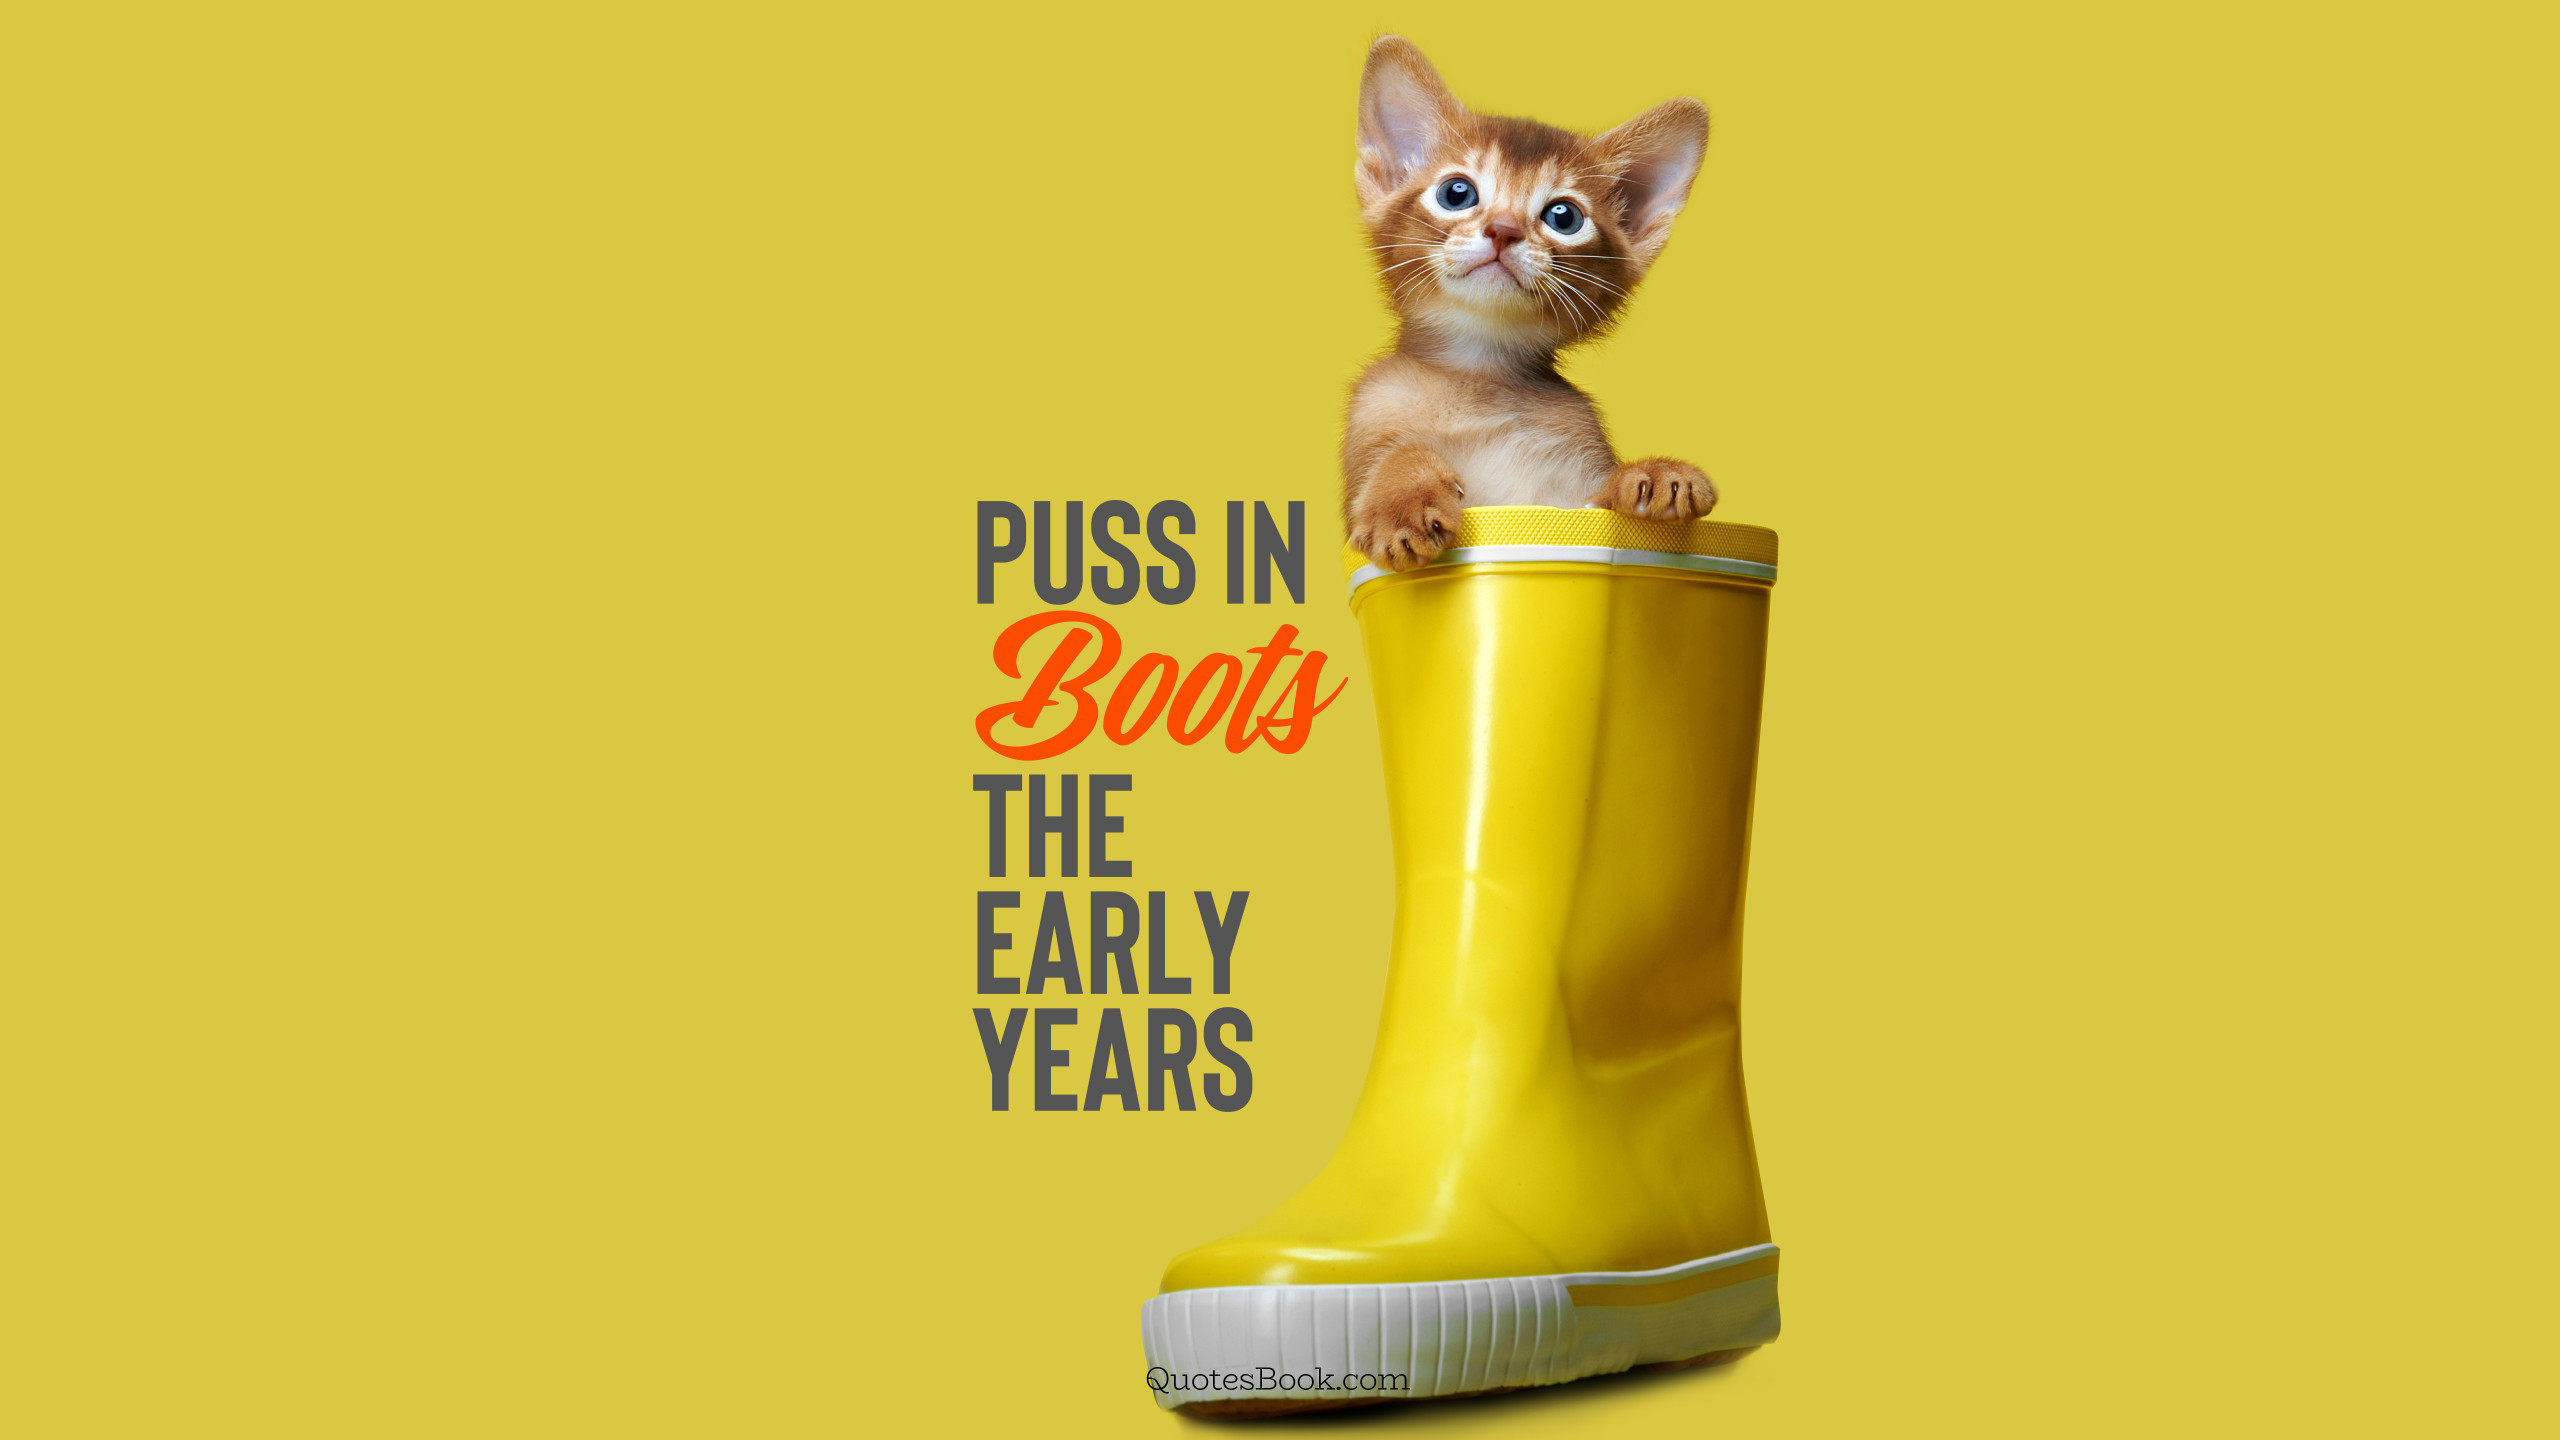 Puss in boots the early years - QuotesBook